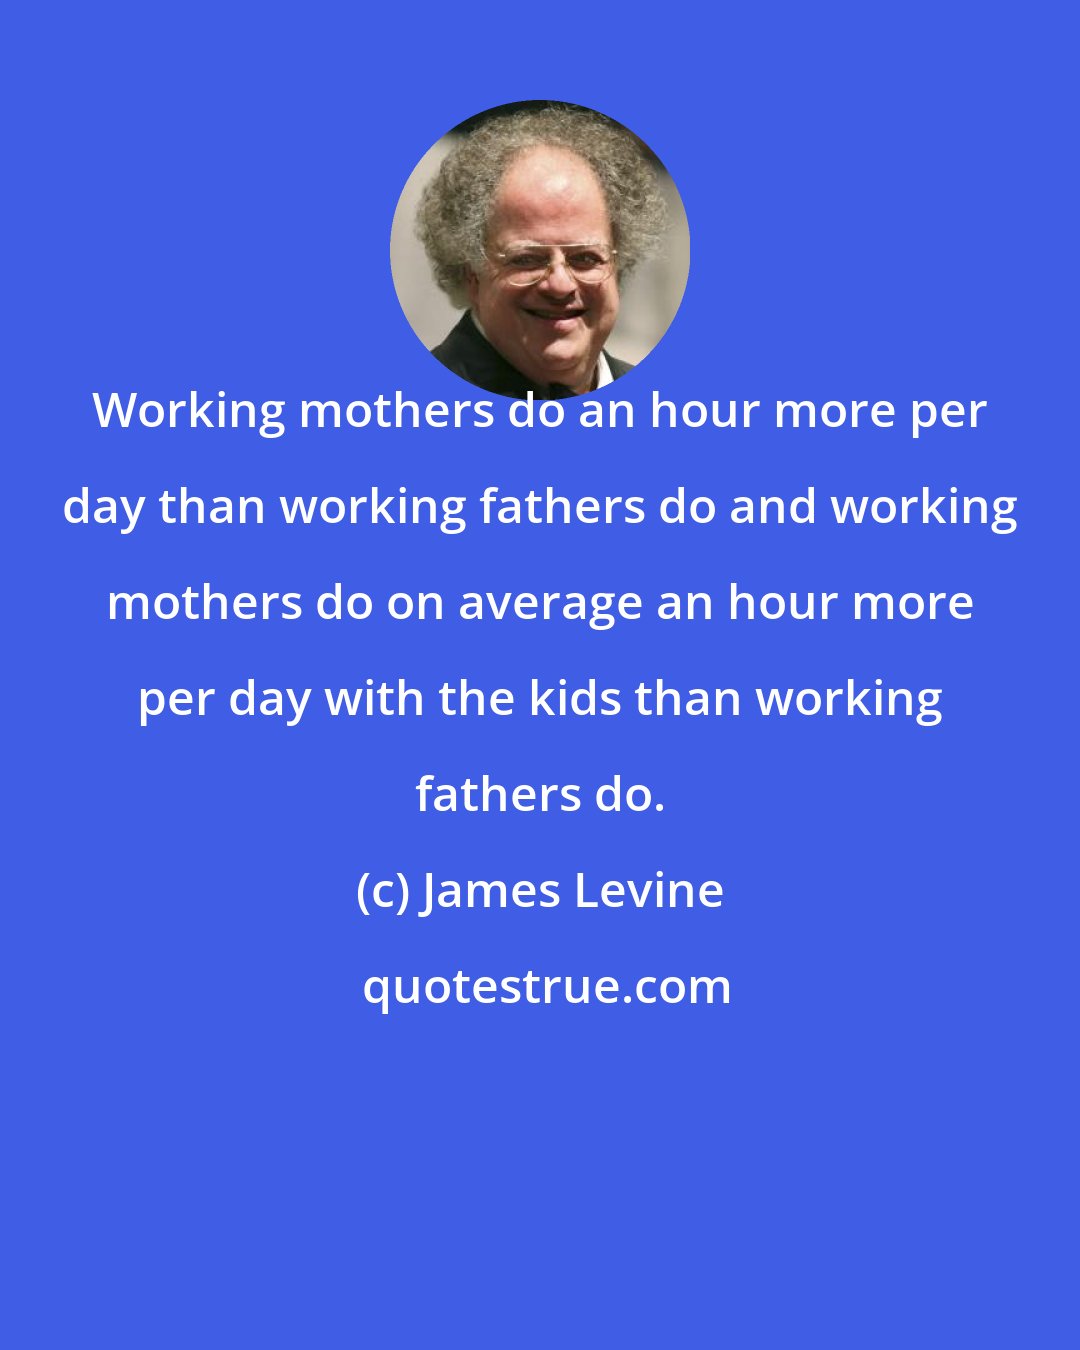 James Levine: Working mothers do an hour more per day than working fathers do and working mothers do on average an hour more per day with the kids than working fathers do.